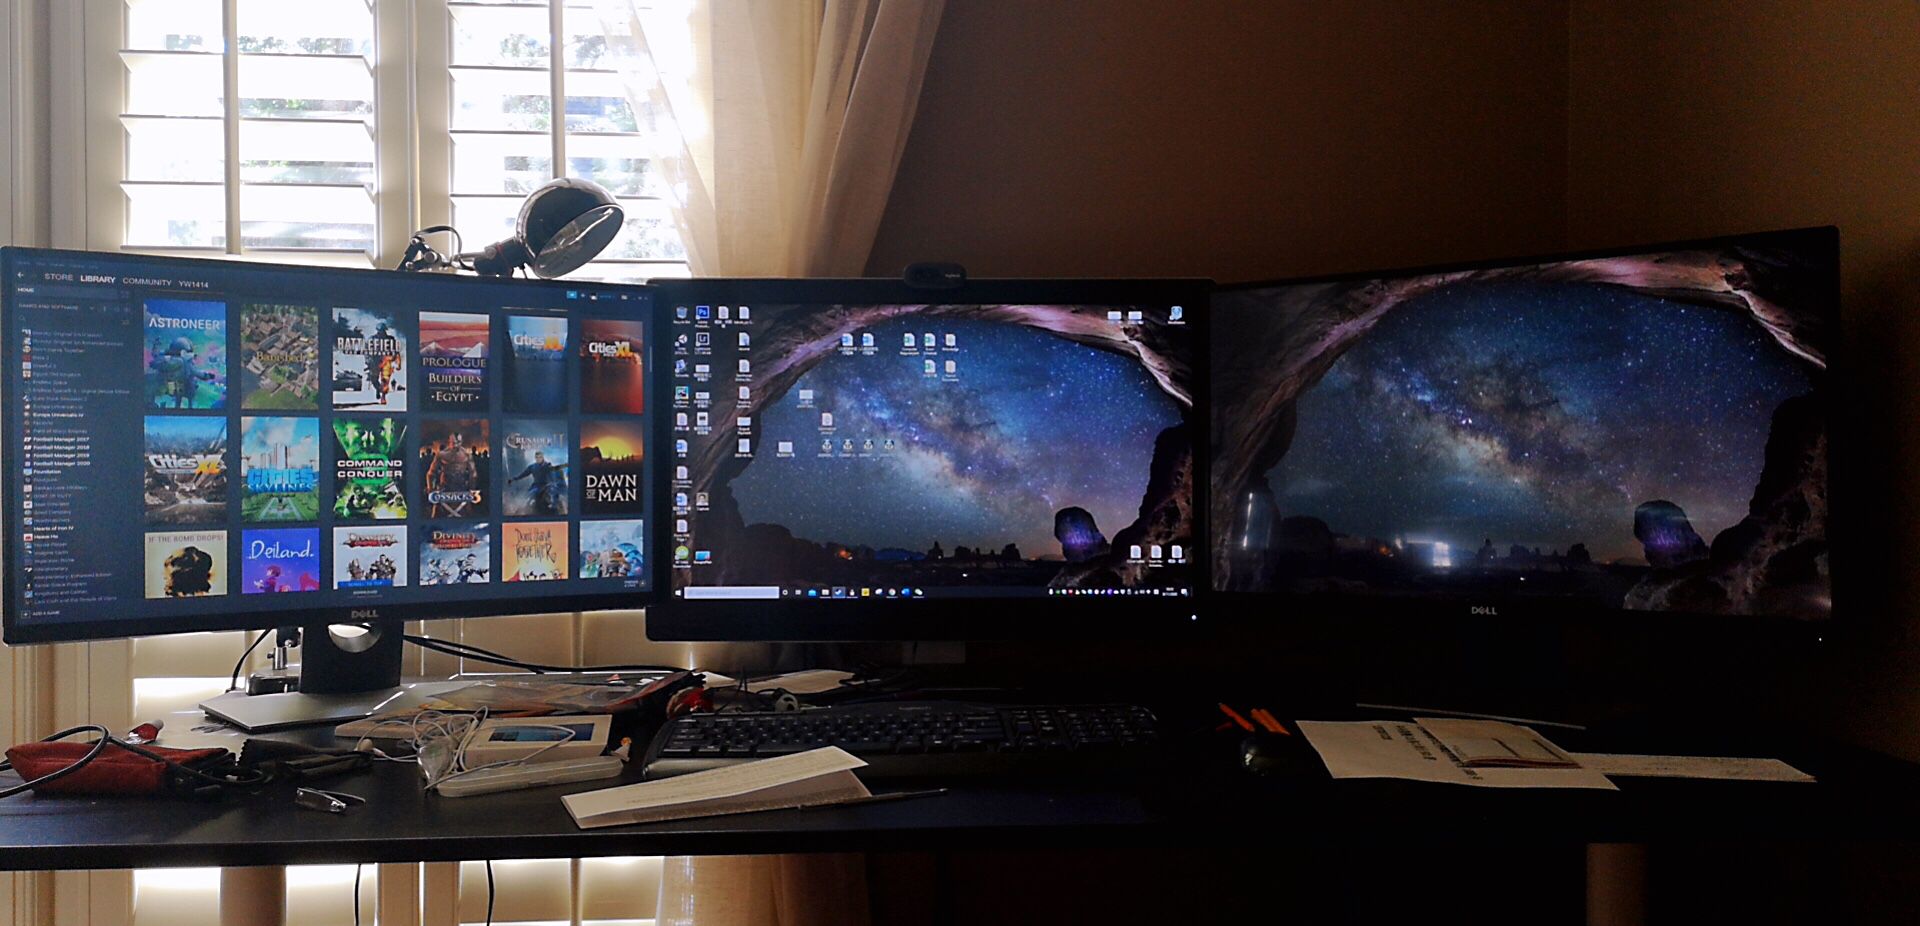 Dell 27” LED Curved Monitor